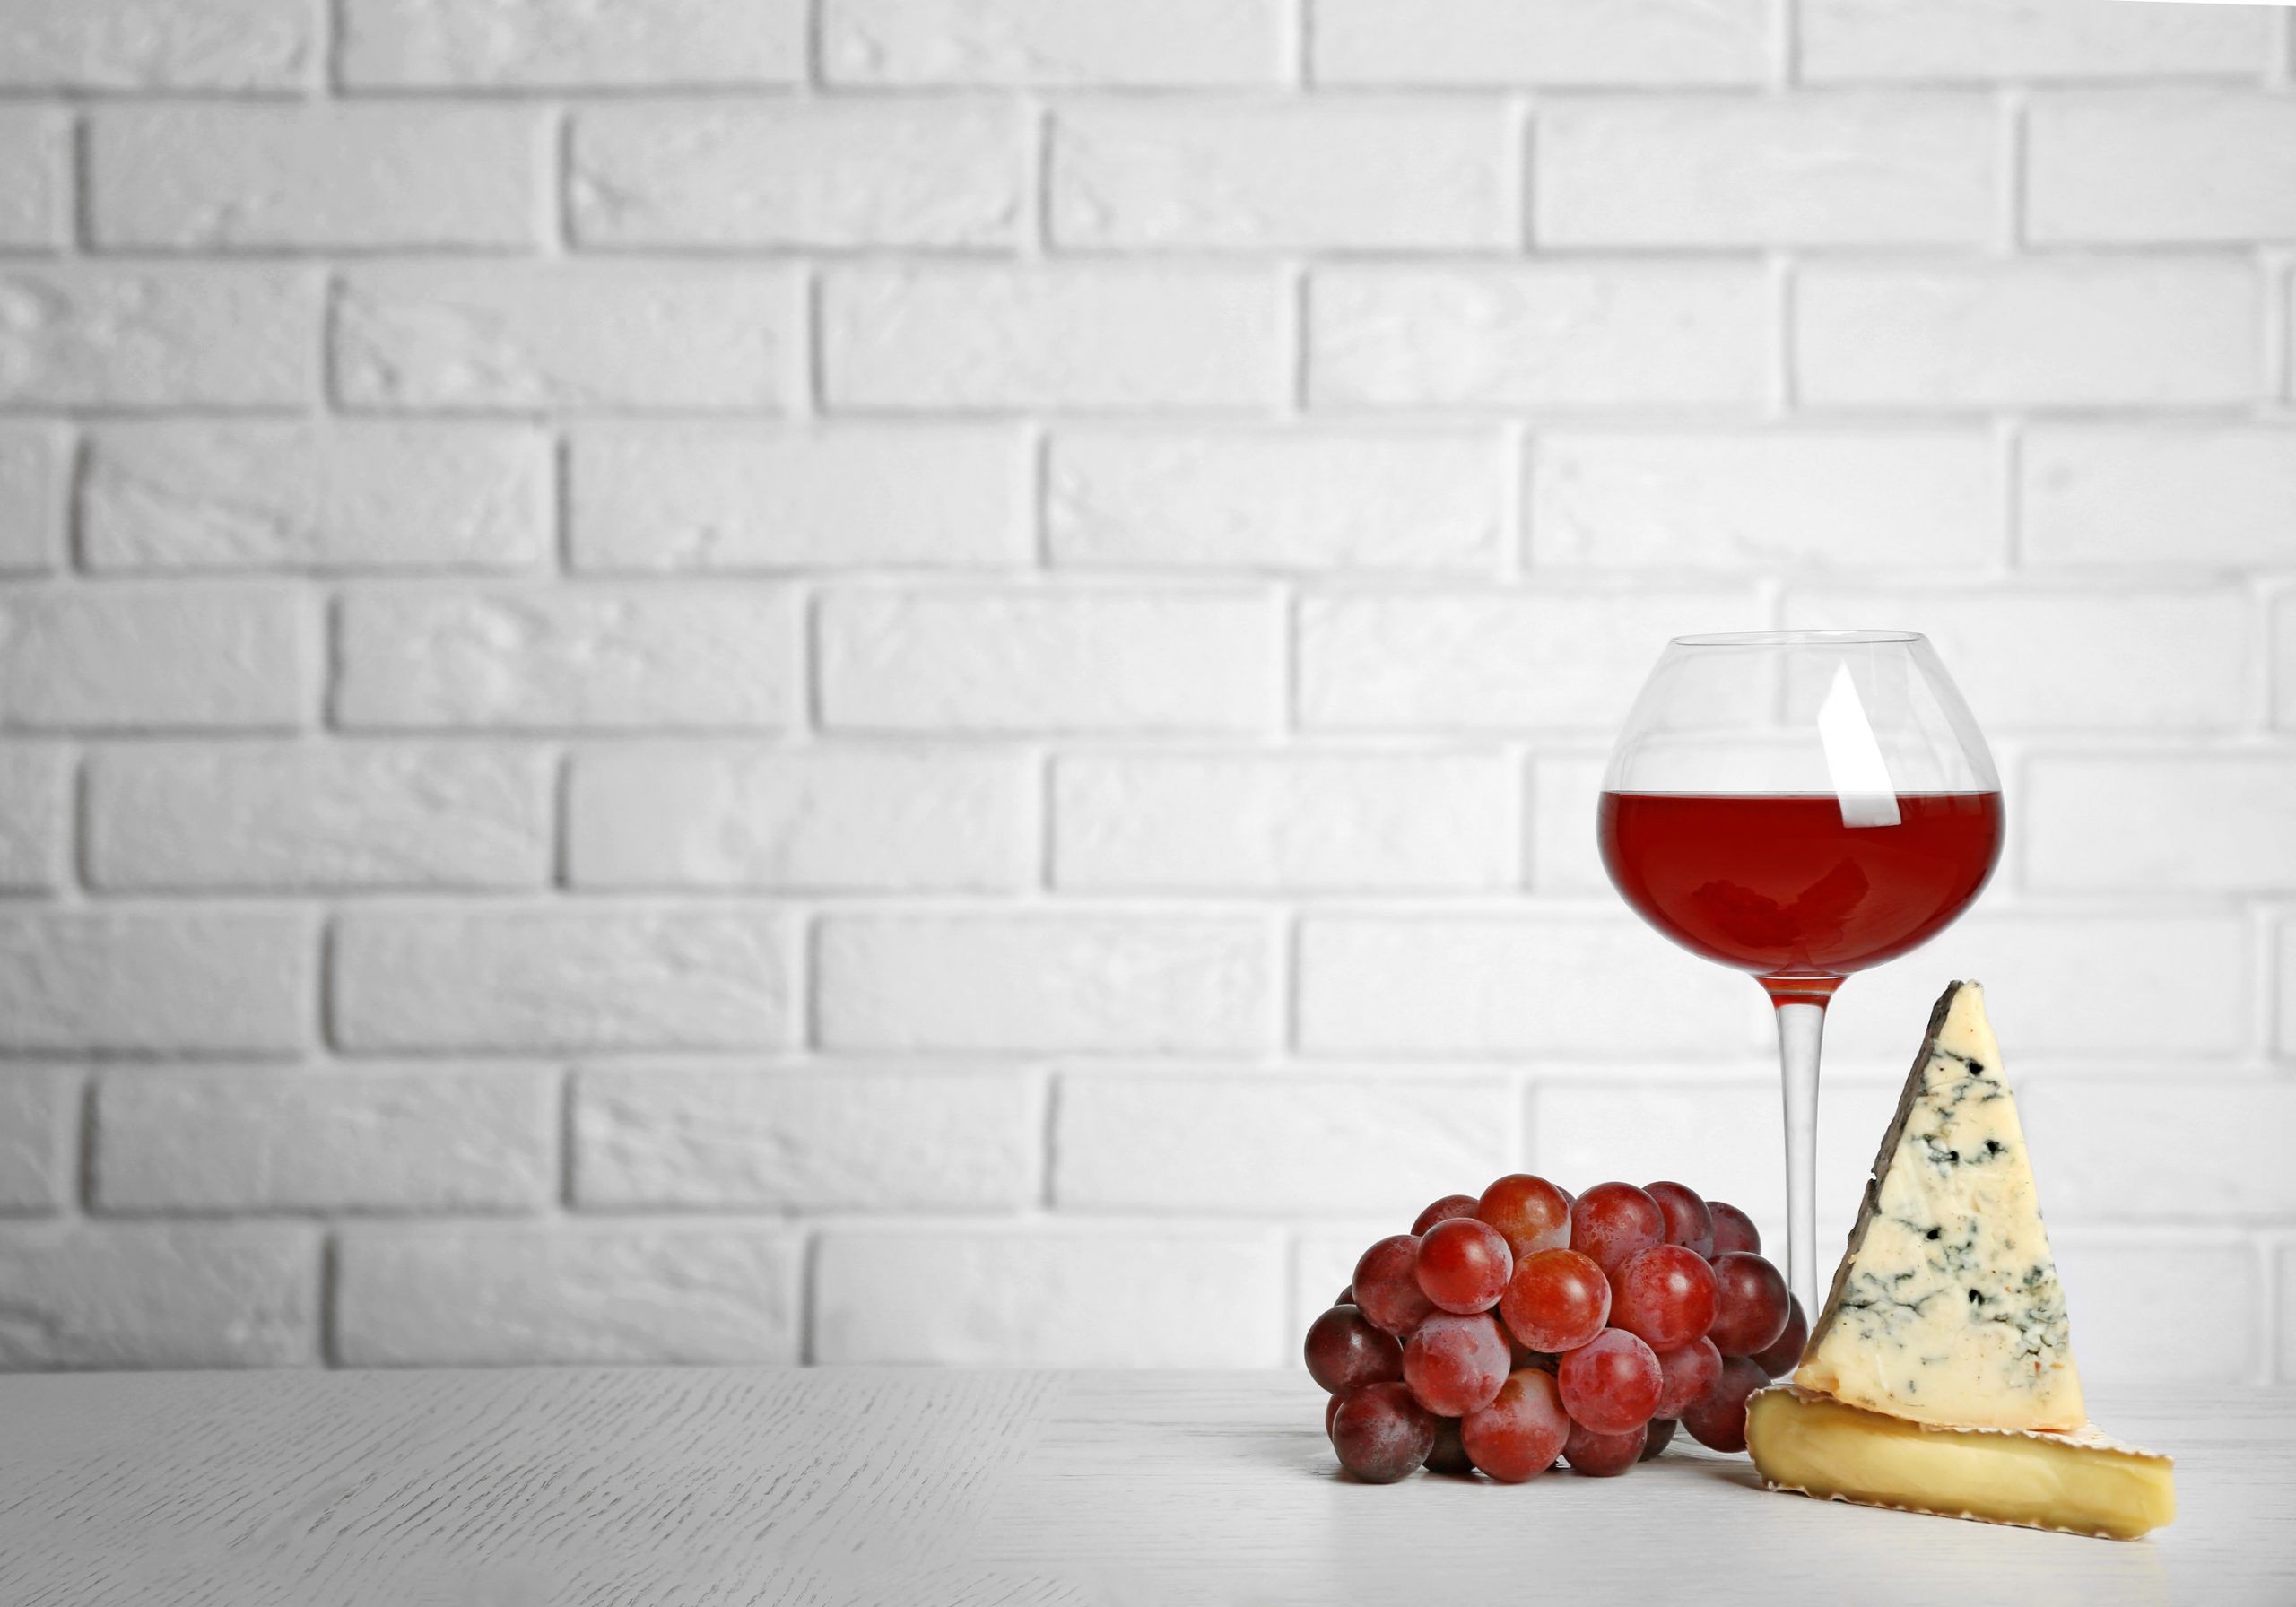 Wine And Cheese Background